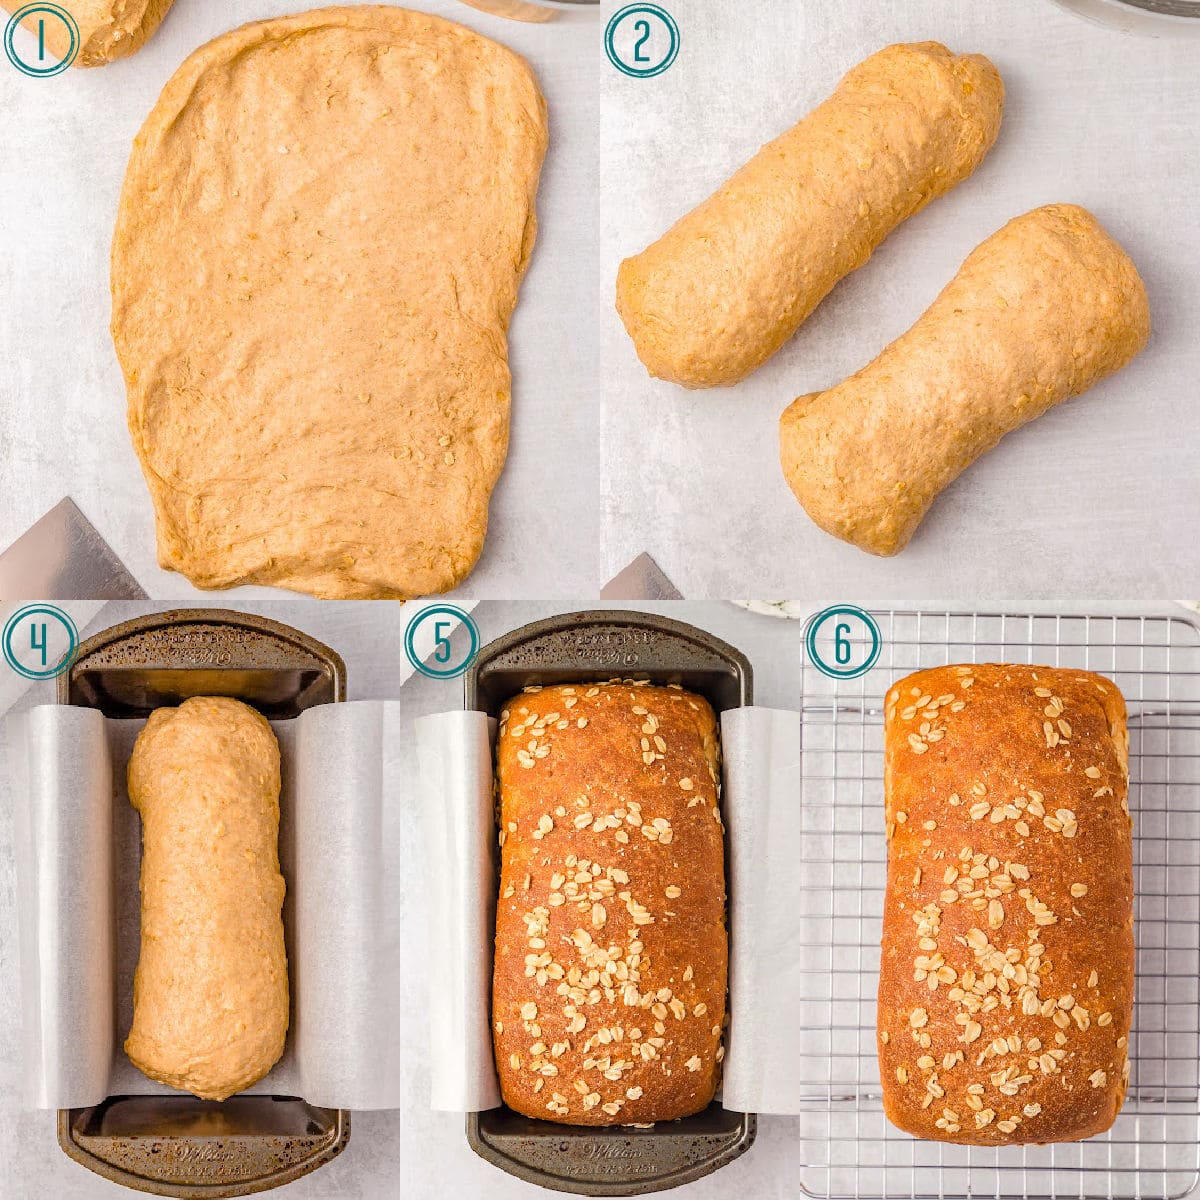 five image collage showing how to roll out and bake two loaves of whole wheat bread.